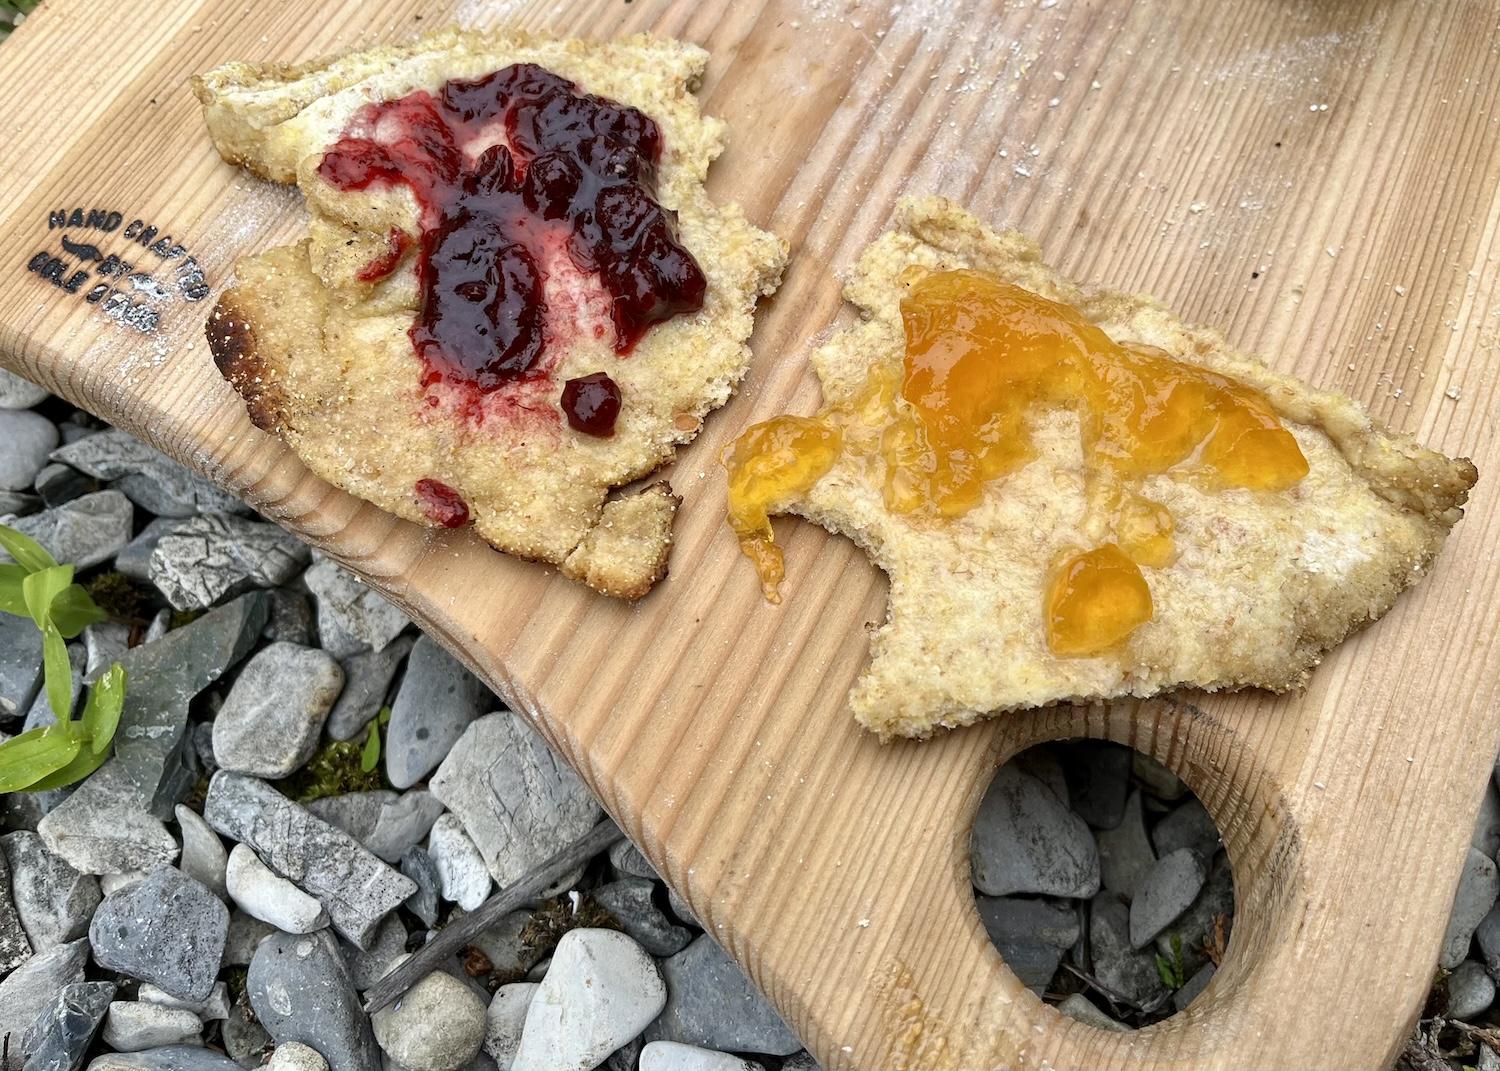 Keith Payne's version of bannock is served with local Newfoundland preserves (partridgeberry and bakeapple).